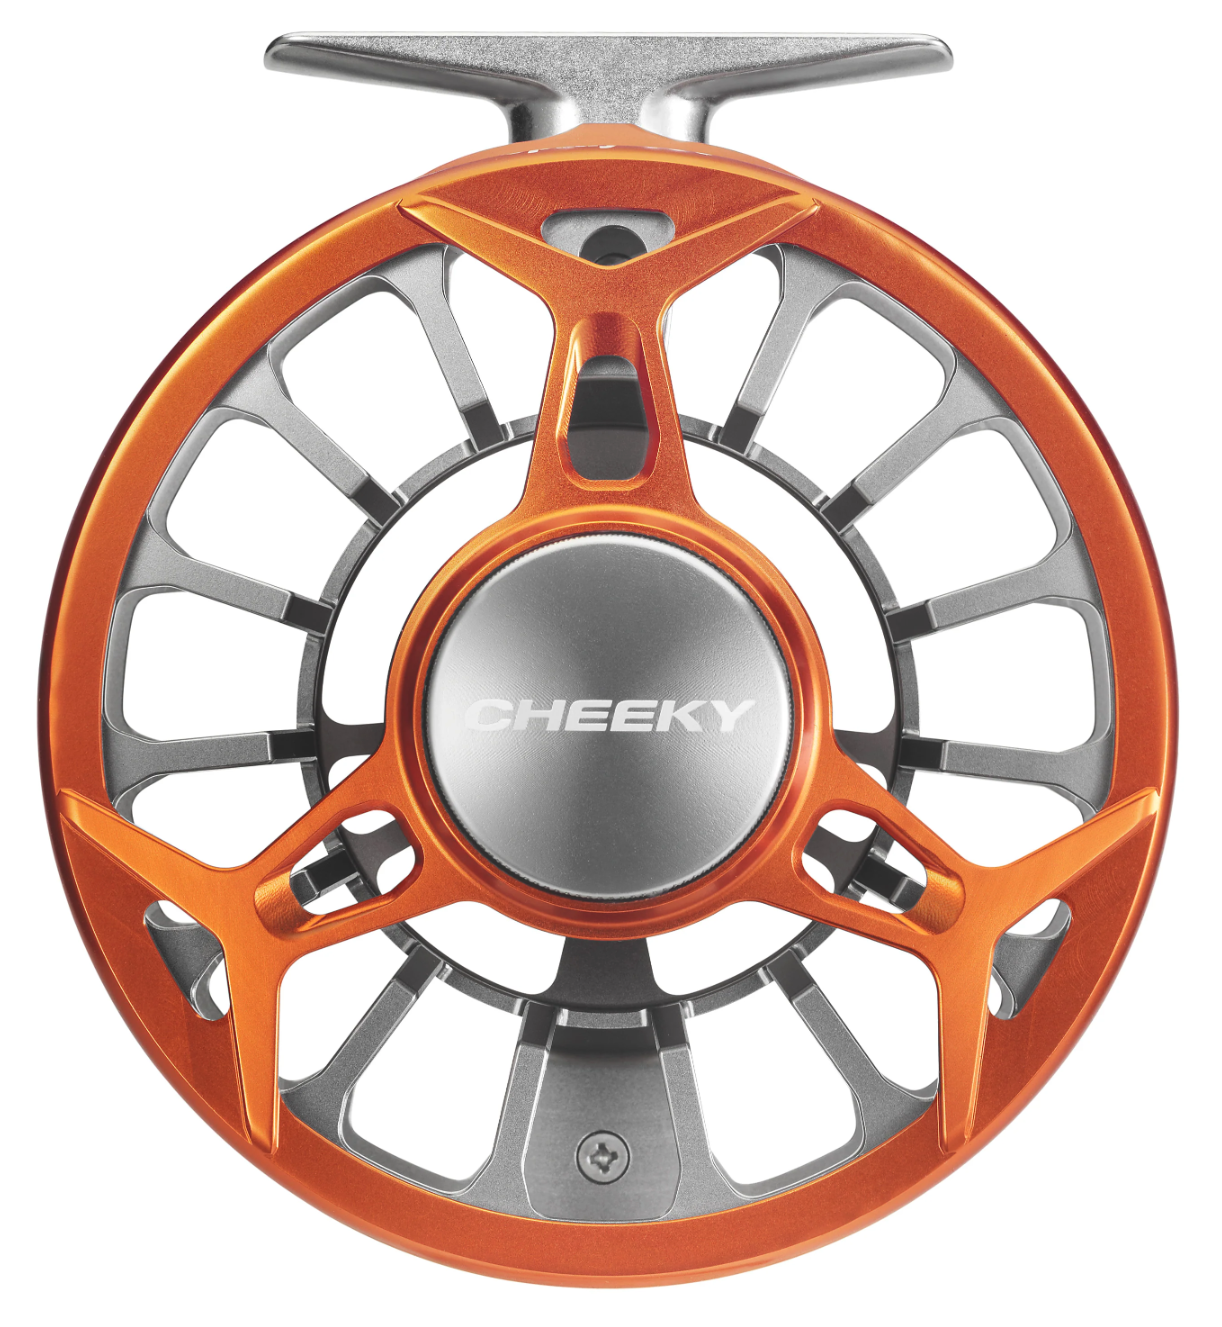 Buy Cheeky Spray Fly Reel online at The Fly Fishers.